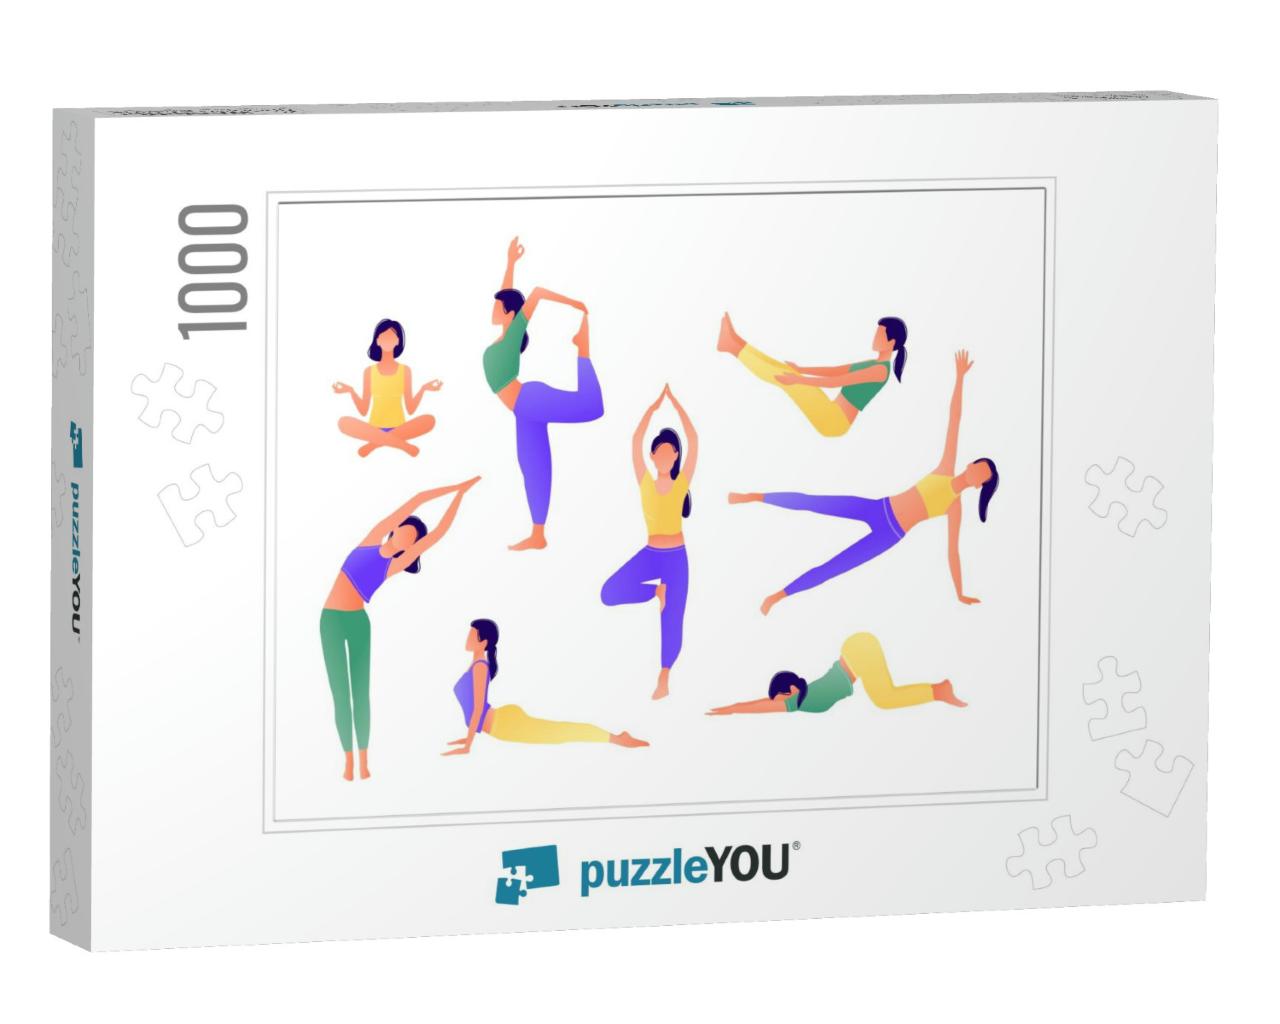 Yoga Workout Girl Set. Women Doing Yoga Exercises... Jigsaw Puzzle with 1000 pieces